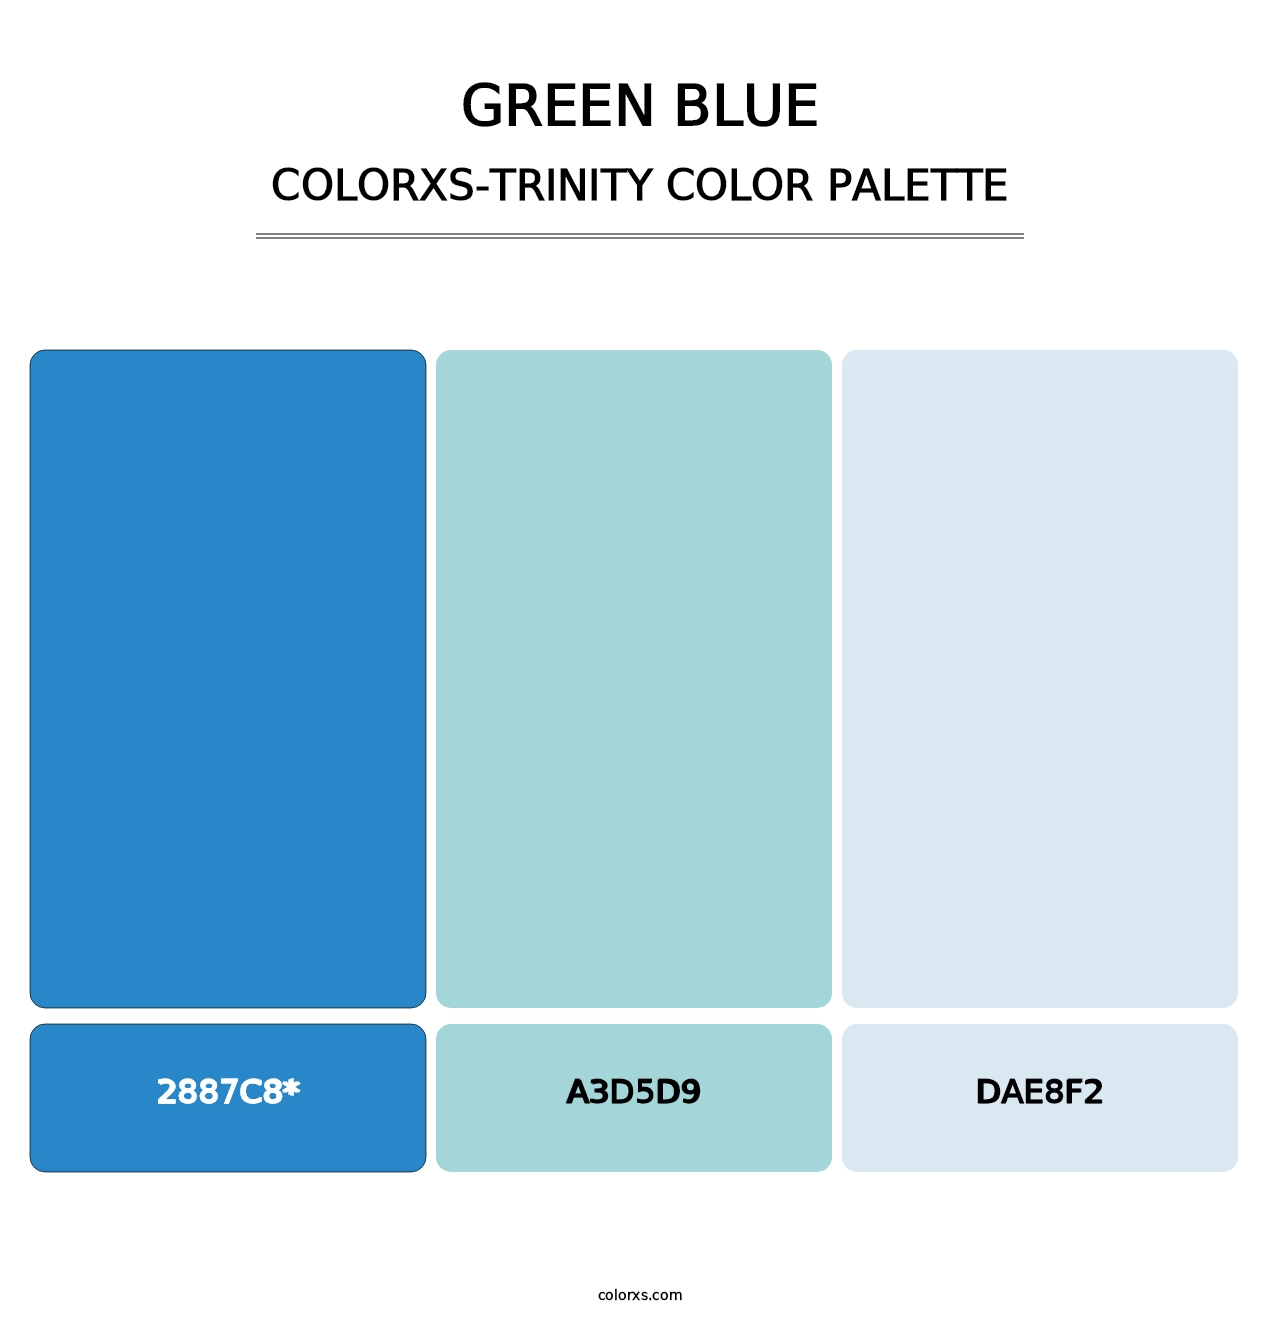 Green Blue - Colorxs Trinity Palette